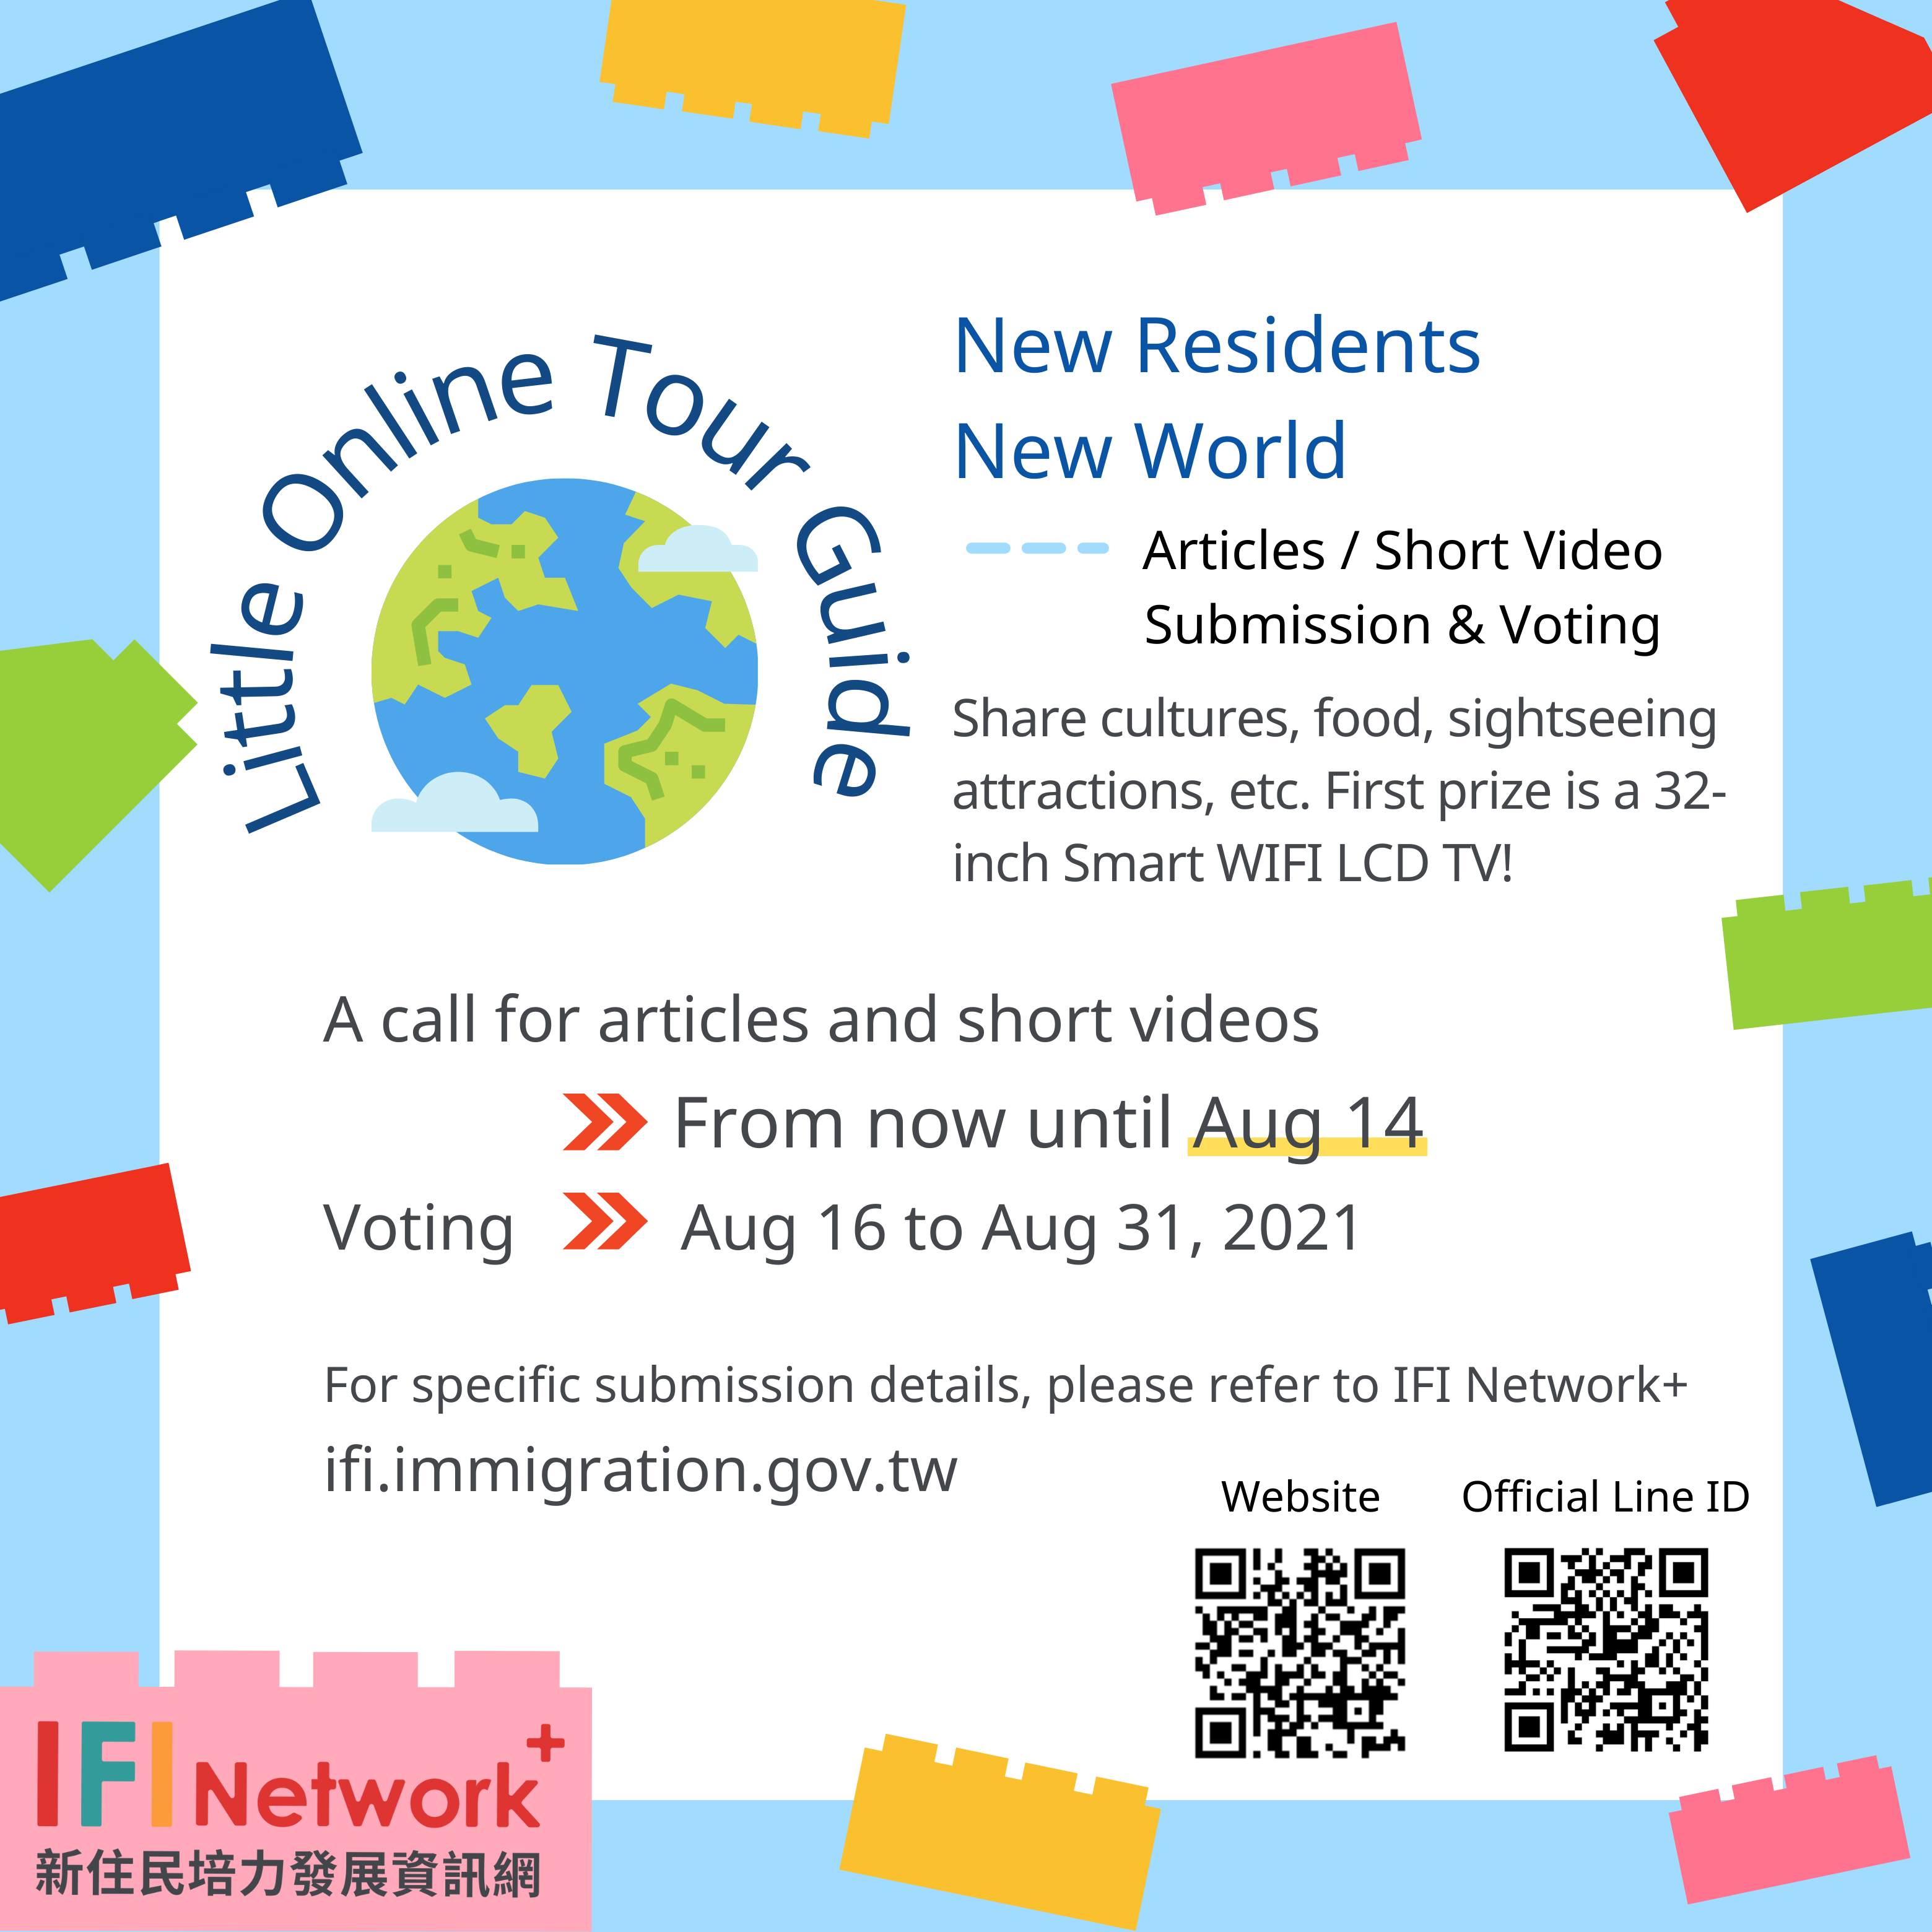 IFI Network+ campaign  "New Residents New World- Little Online Tour Guide"